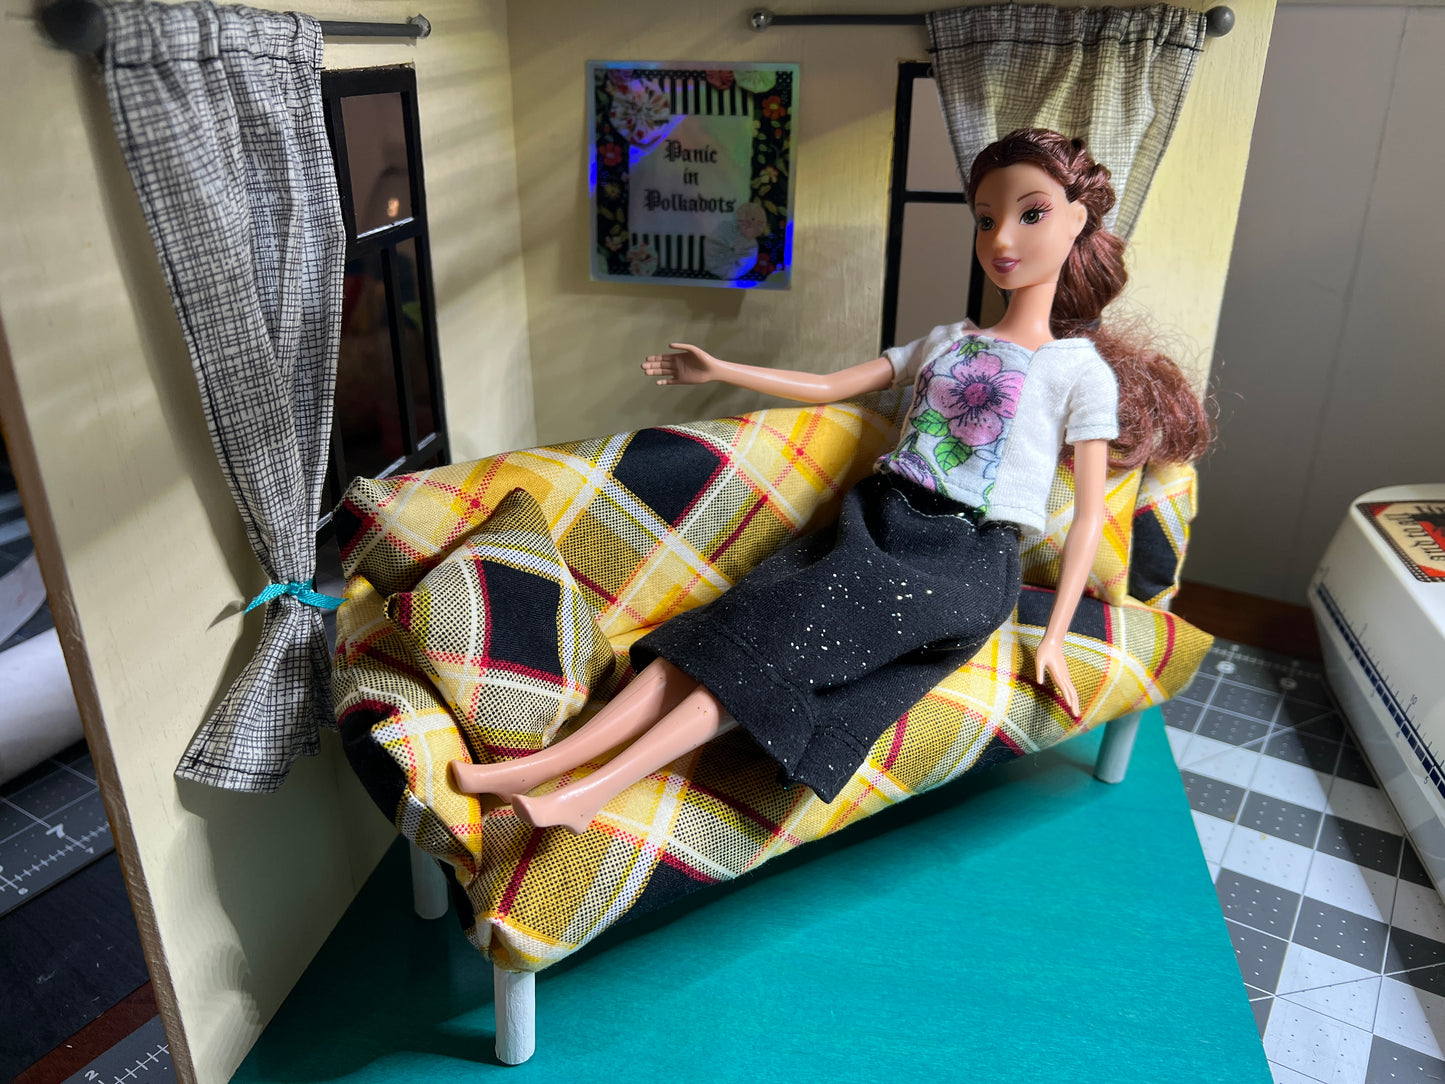 Barbie on couch yellow plaid, shown in a roombox for styling and scale 1:6